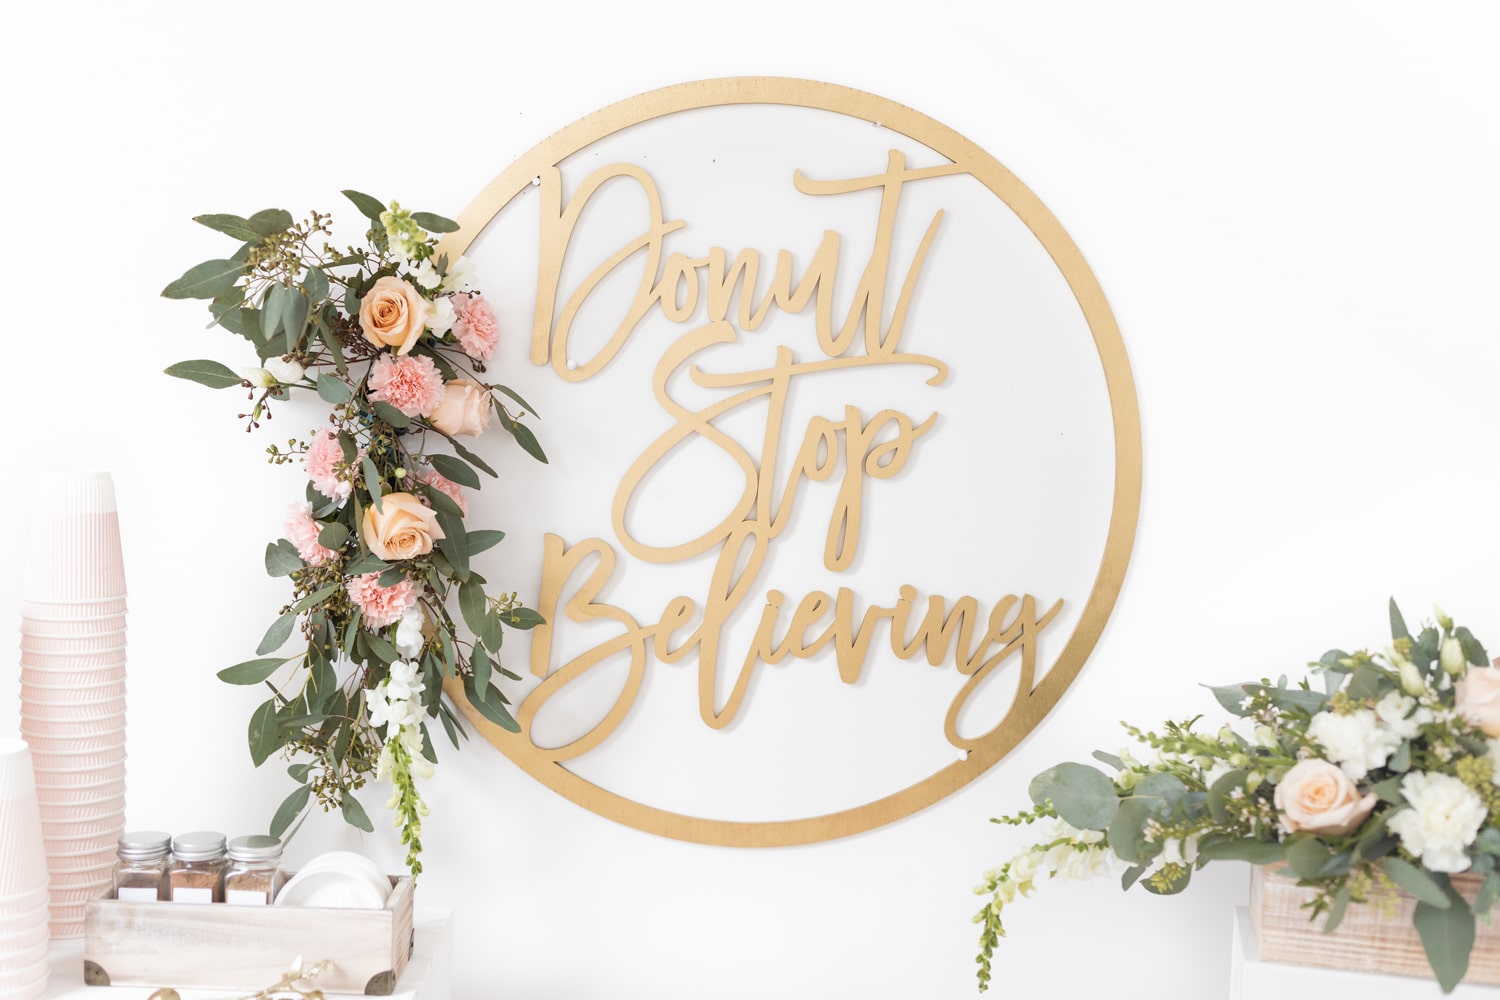 Donut Stop Believing party sign on Diary of a Debutante